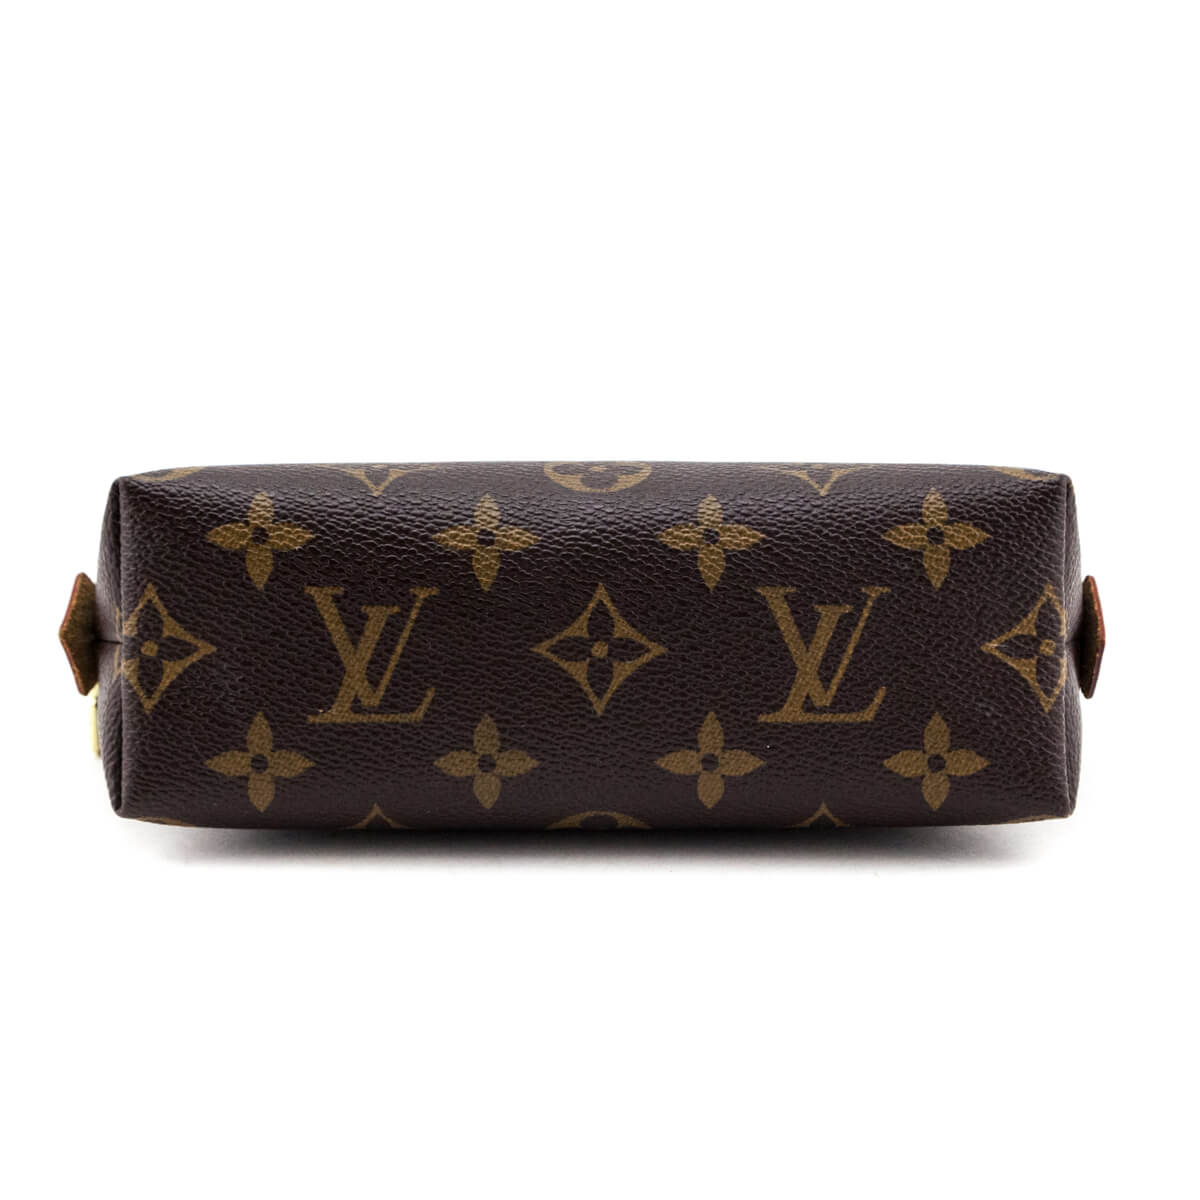 Louis Vuitton Monogram Cosmetic Pouch - Love that Bag etc - Preowned Authentic Designer Handbags & Preloved Fashions